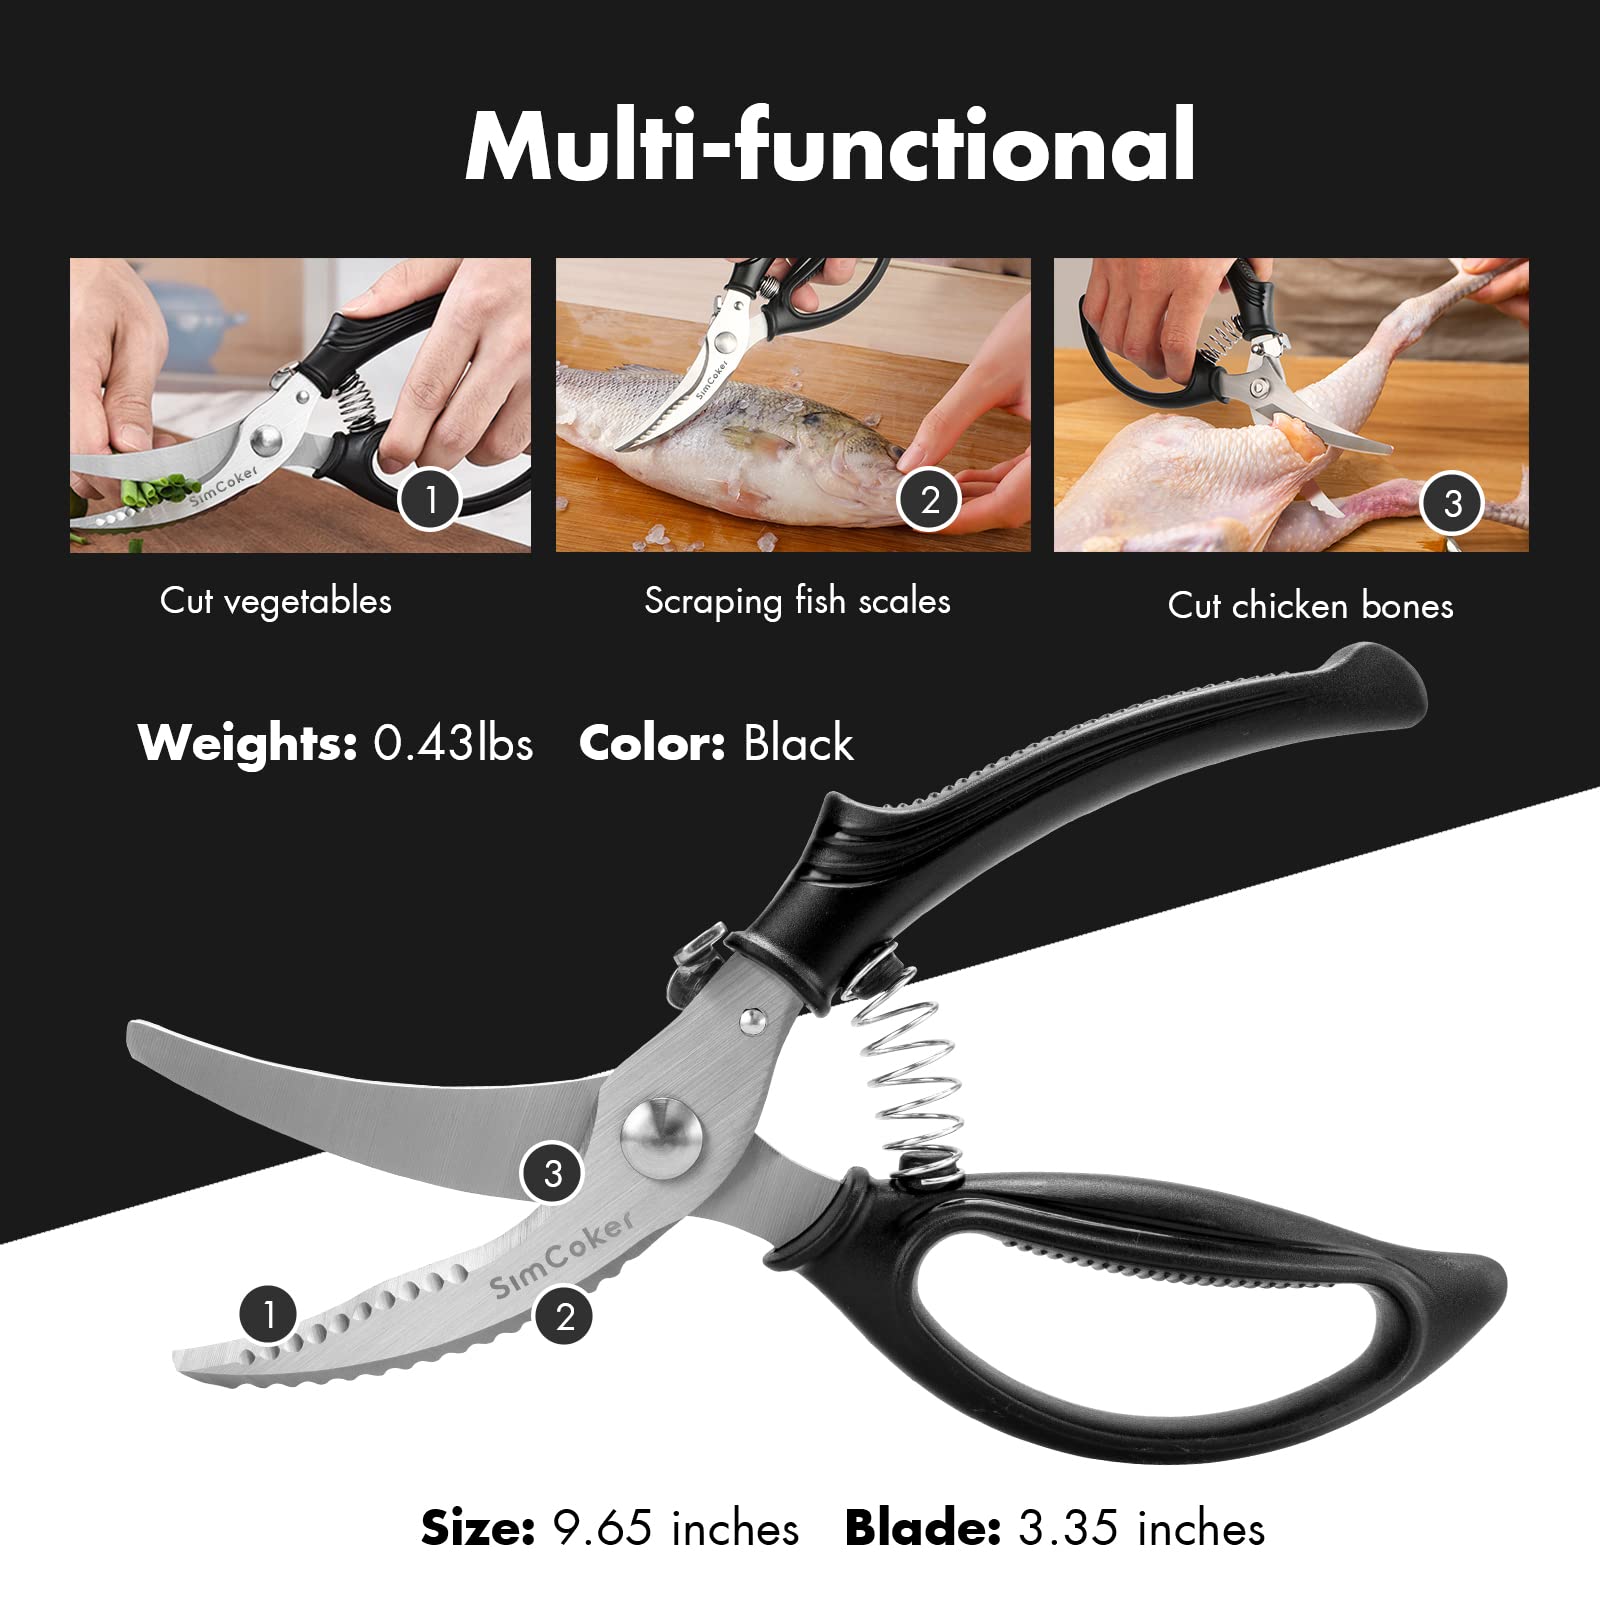 SimCoker Poultry Shears, Heavy Duty Kitchen Shears With Anti-Slip Handle & Safety Lock, Poultry Scissors for Meat, Chicken, Bone, Poultry, Spring Loaded, Dishwasher Safe (Black)…